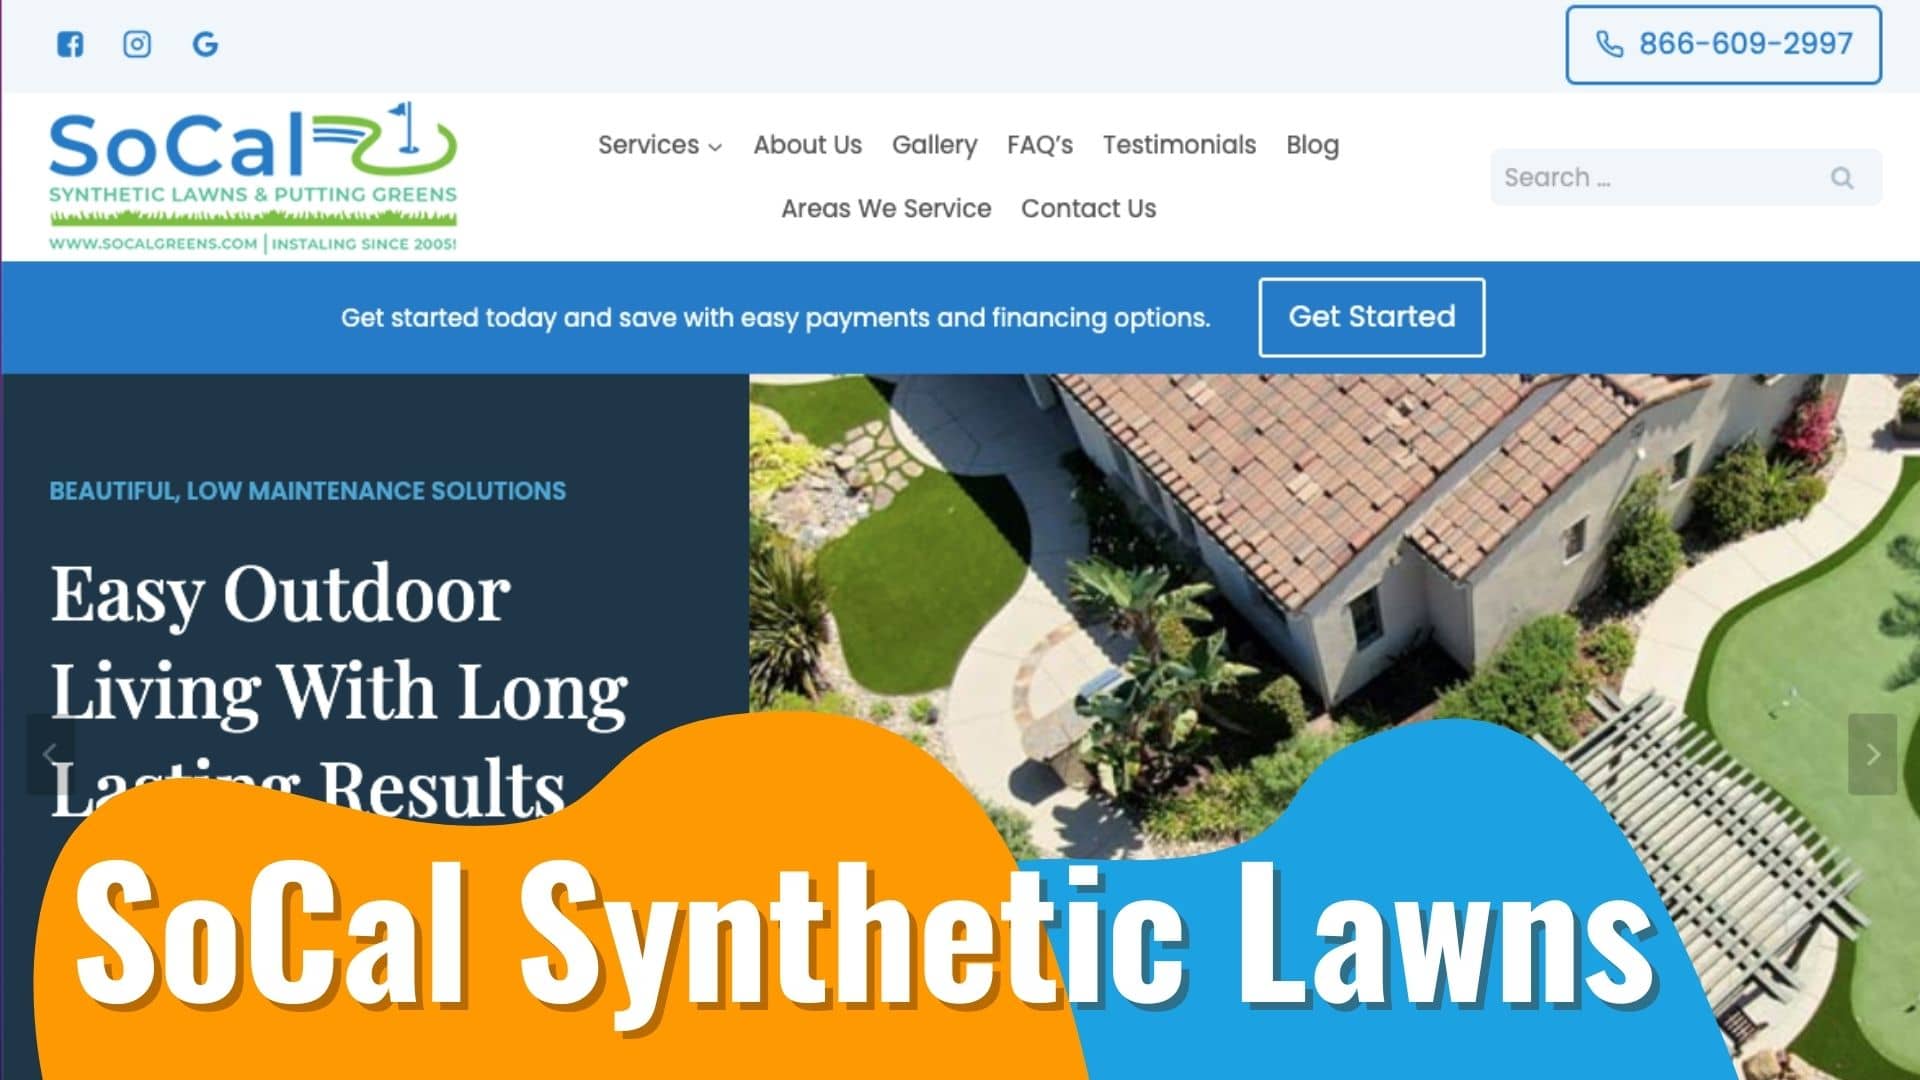 SoCal Synthetic Lawns and Putting Greens